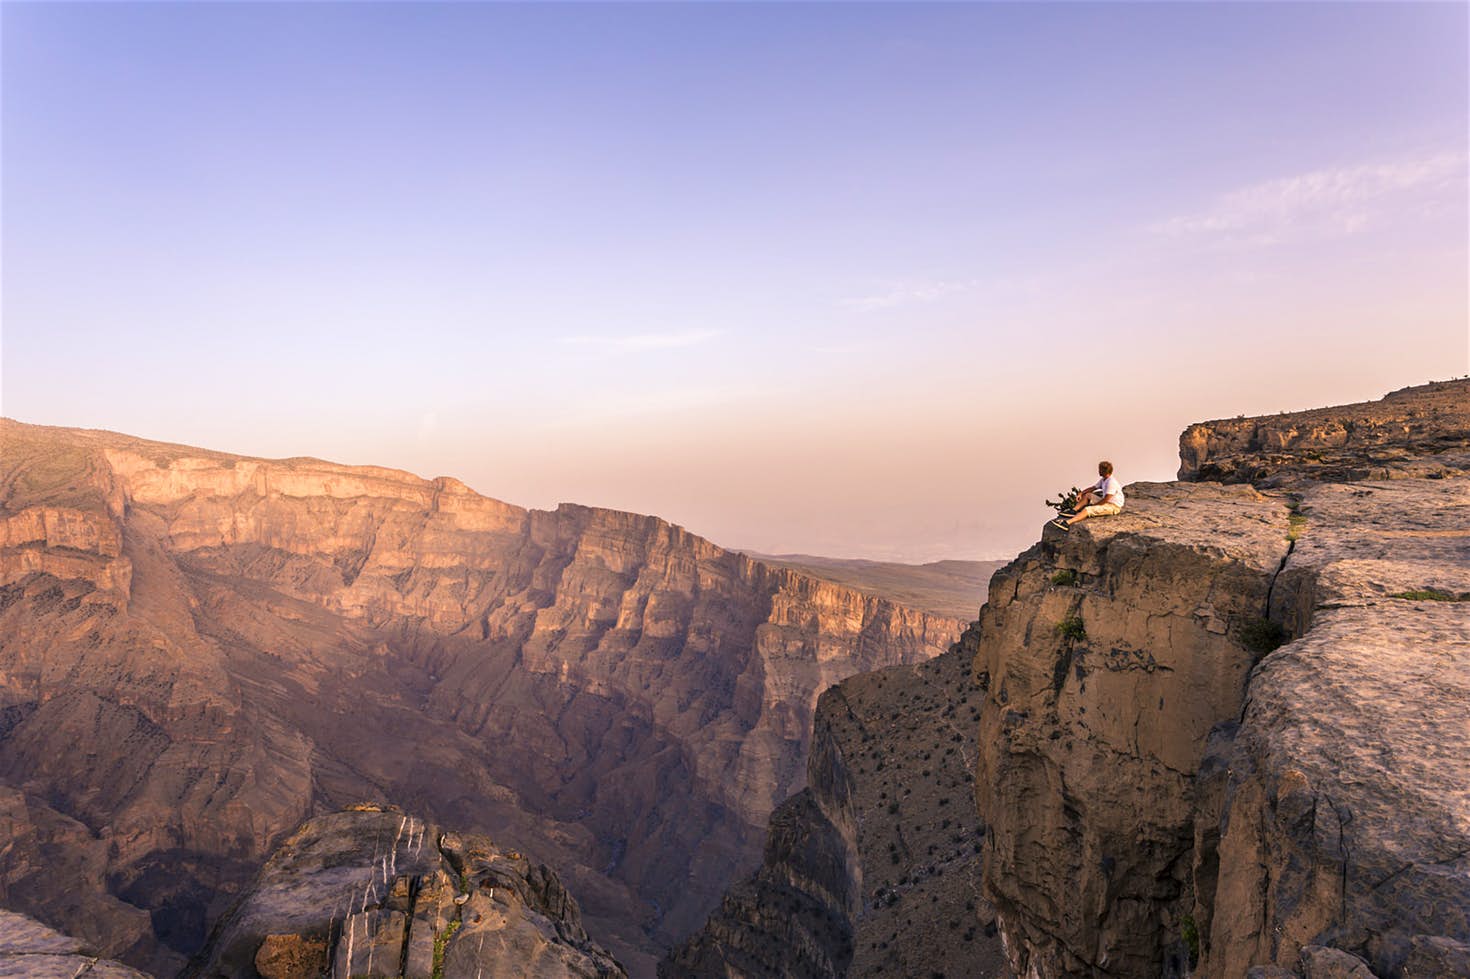 The natural wonders of nature lie in the Sultanate of - The natural wonders of nature lie in the Sultanate of Oman